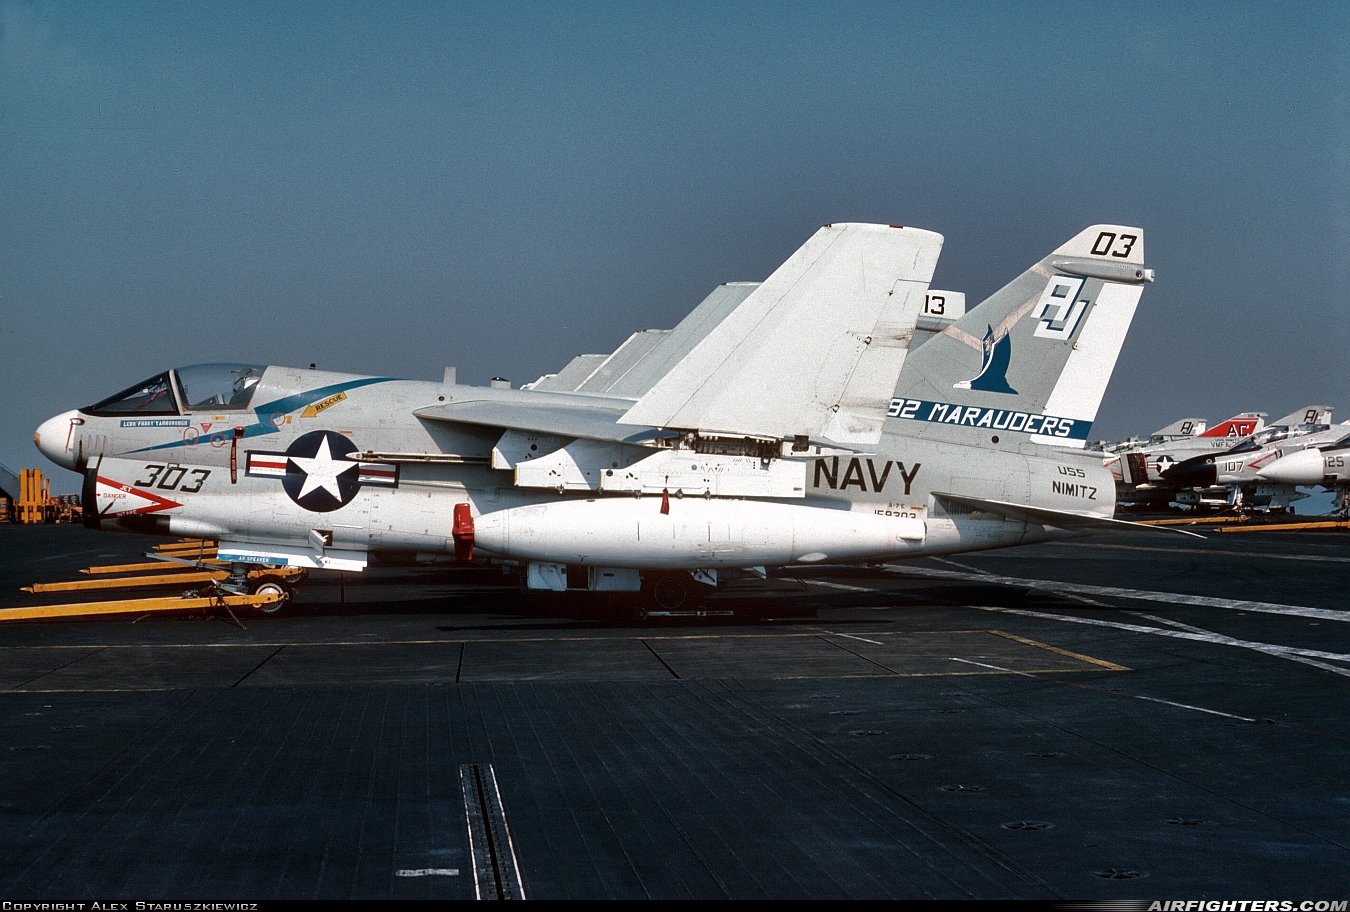 USA - Navy LTV Aerospace A-7E Corsair II 159303 at Off-Airport - Wilhelmshaven, Germany